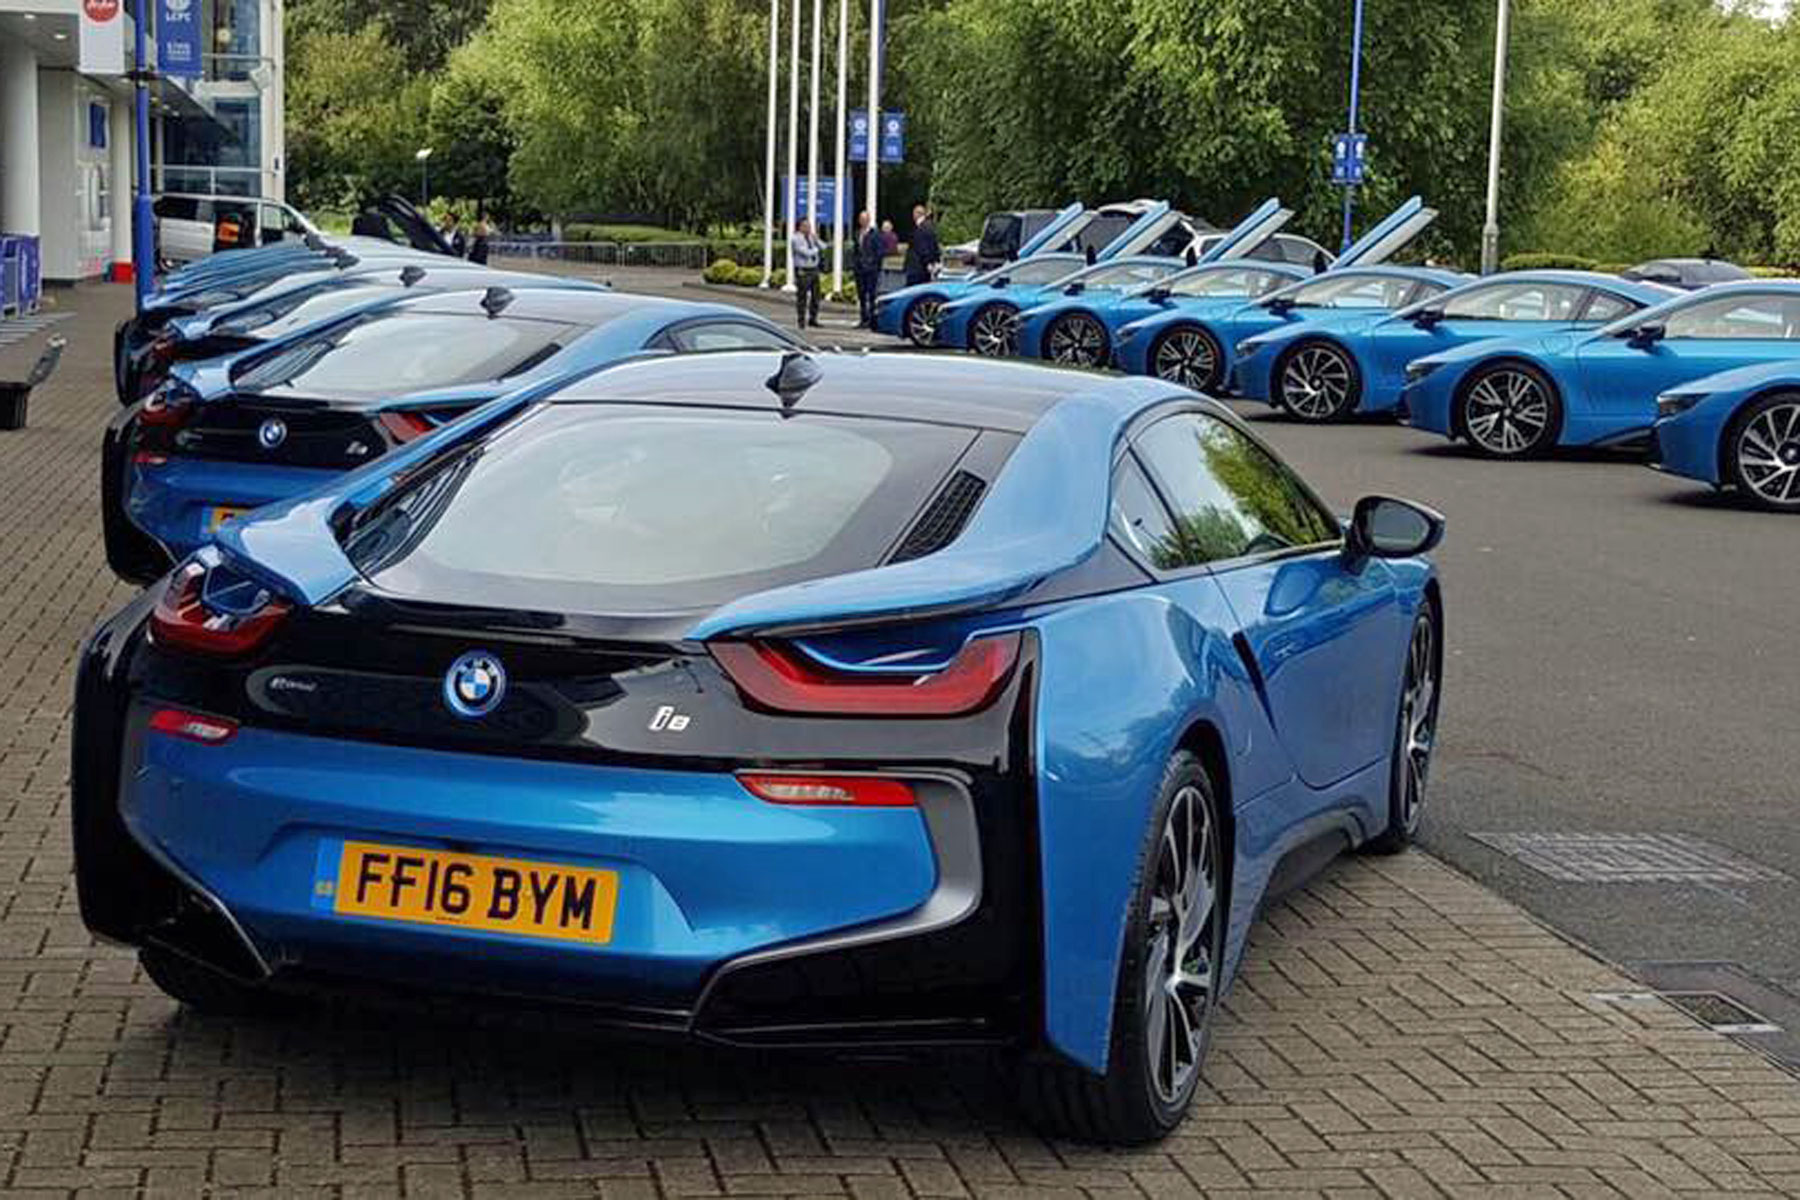 Leicester City owners treat players to fleet of BMW i8s